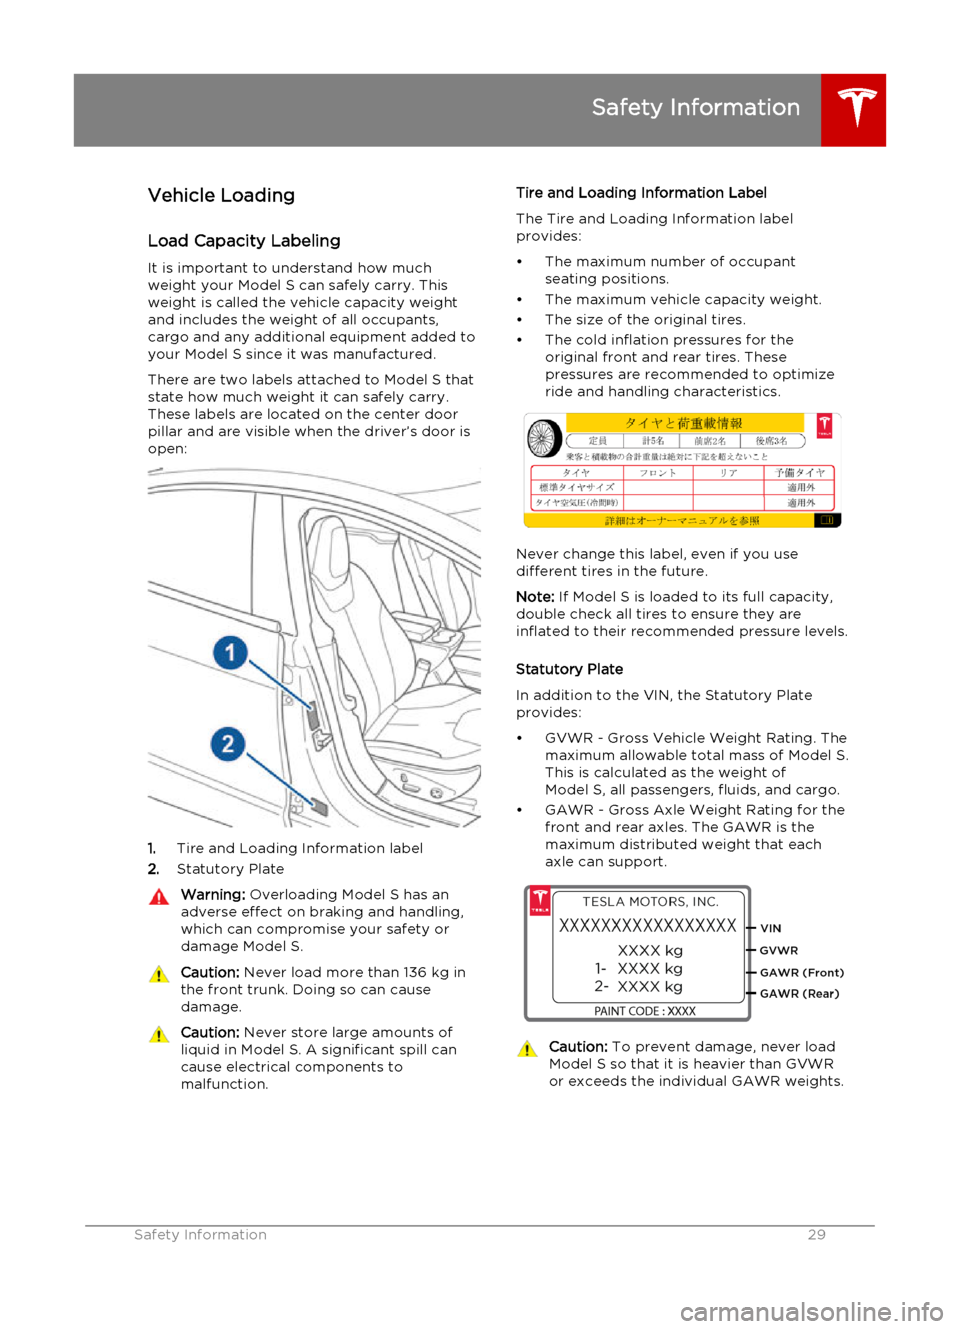 TESLA MODEL S 2015  クイックガイド (in Japanese) Vehicle Loading
Load Capacity Labeling It is important to understand how much
weight your Model S can safely carry. This weight is called the vehicle capacity weight
and includes the weight of all occ